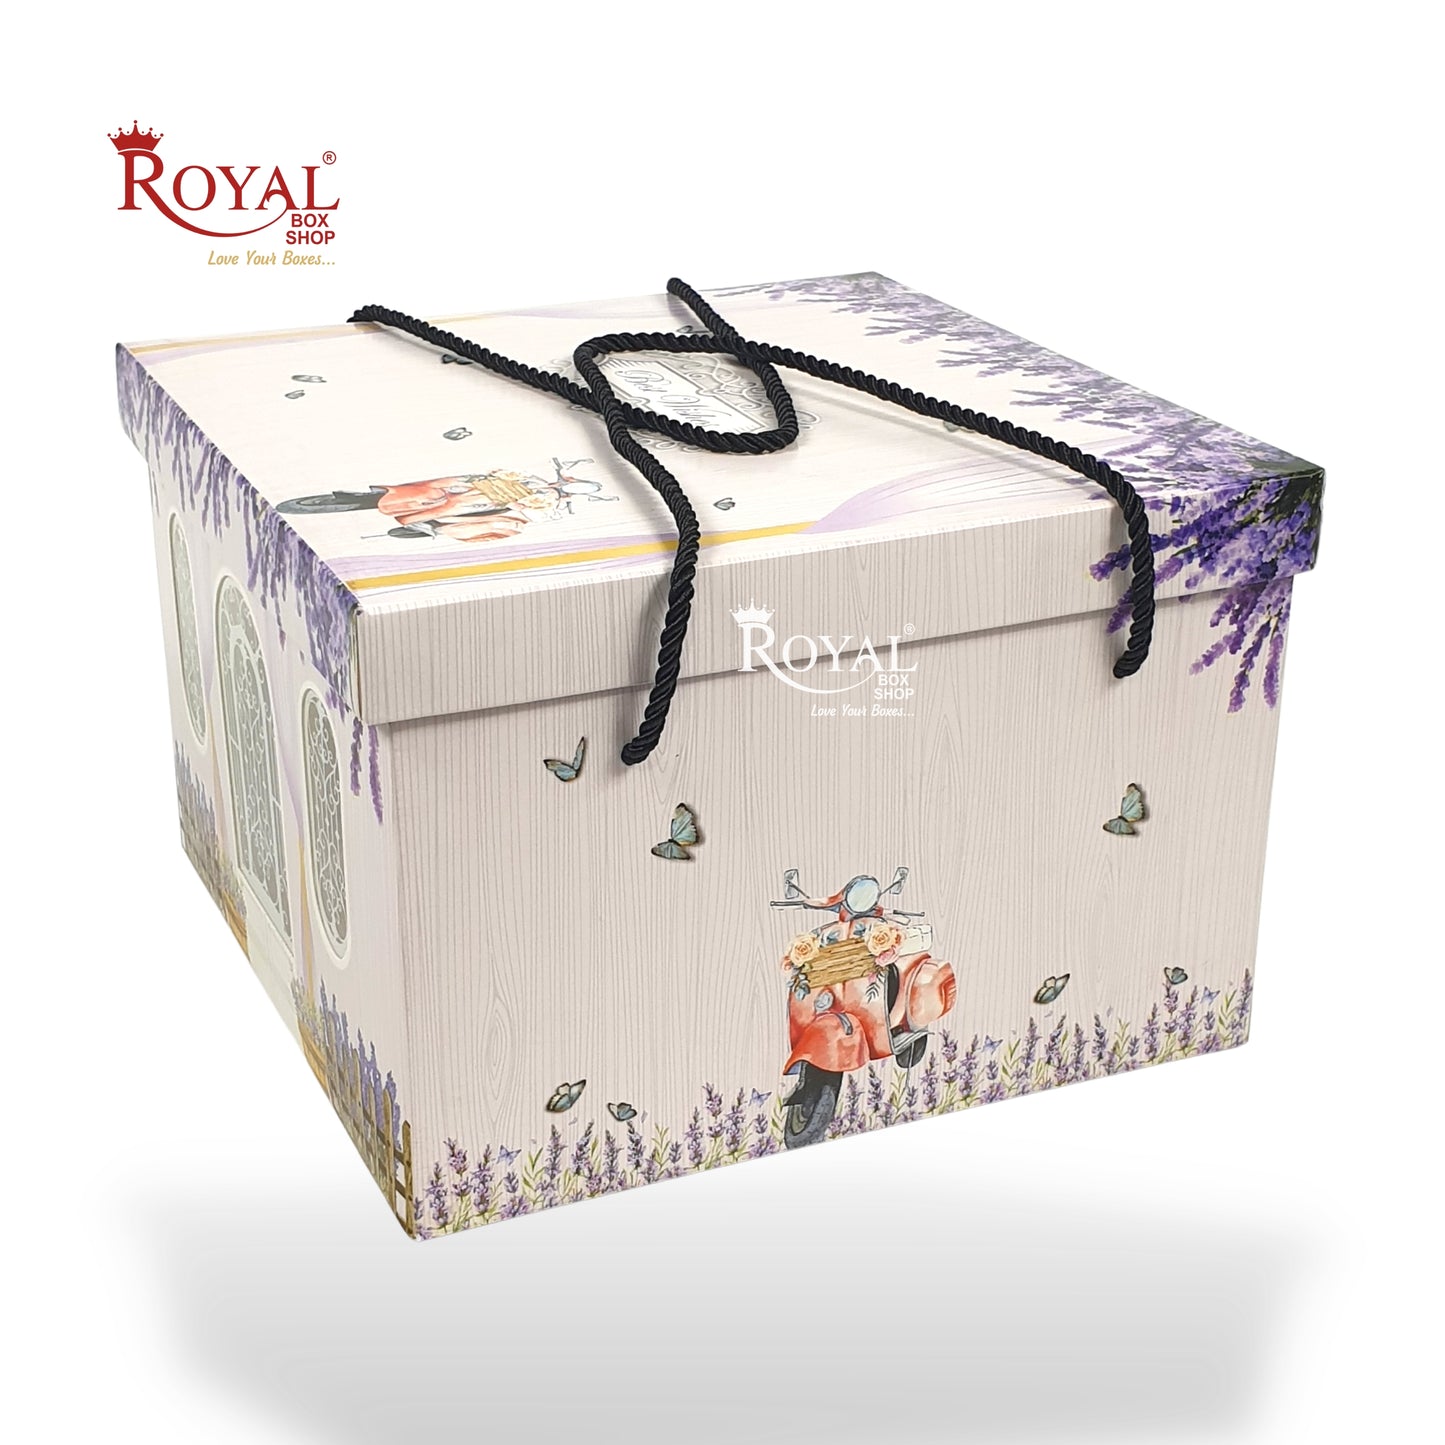 Cottage Theme Hamper Gift Box | Purple | 9x9x6 Inch I Perfect for Wedding Gifts, Room Hampers, Special Occasions & More